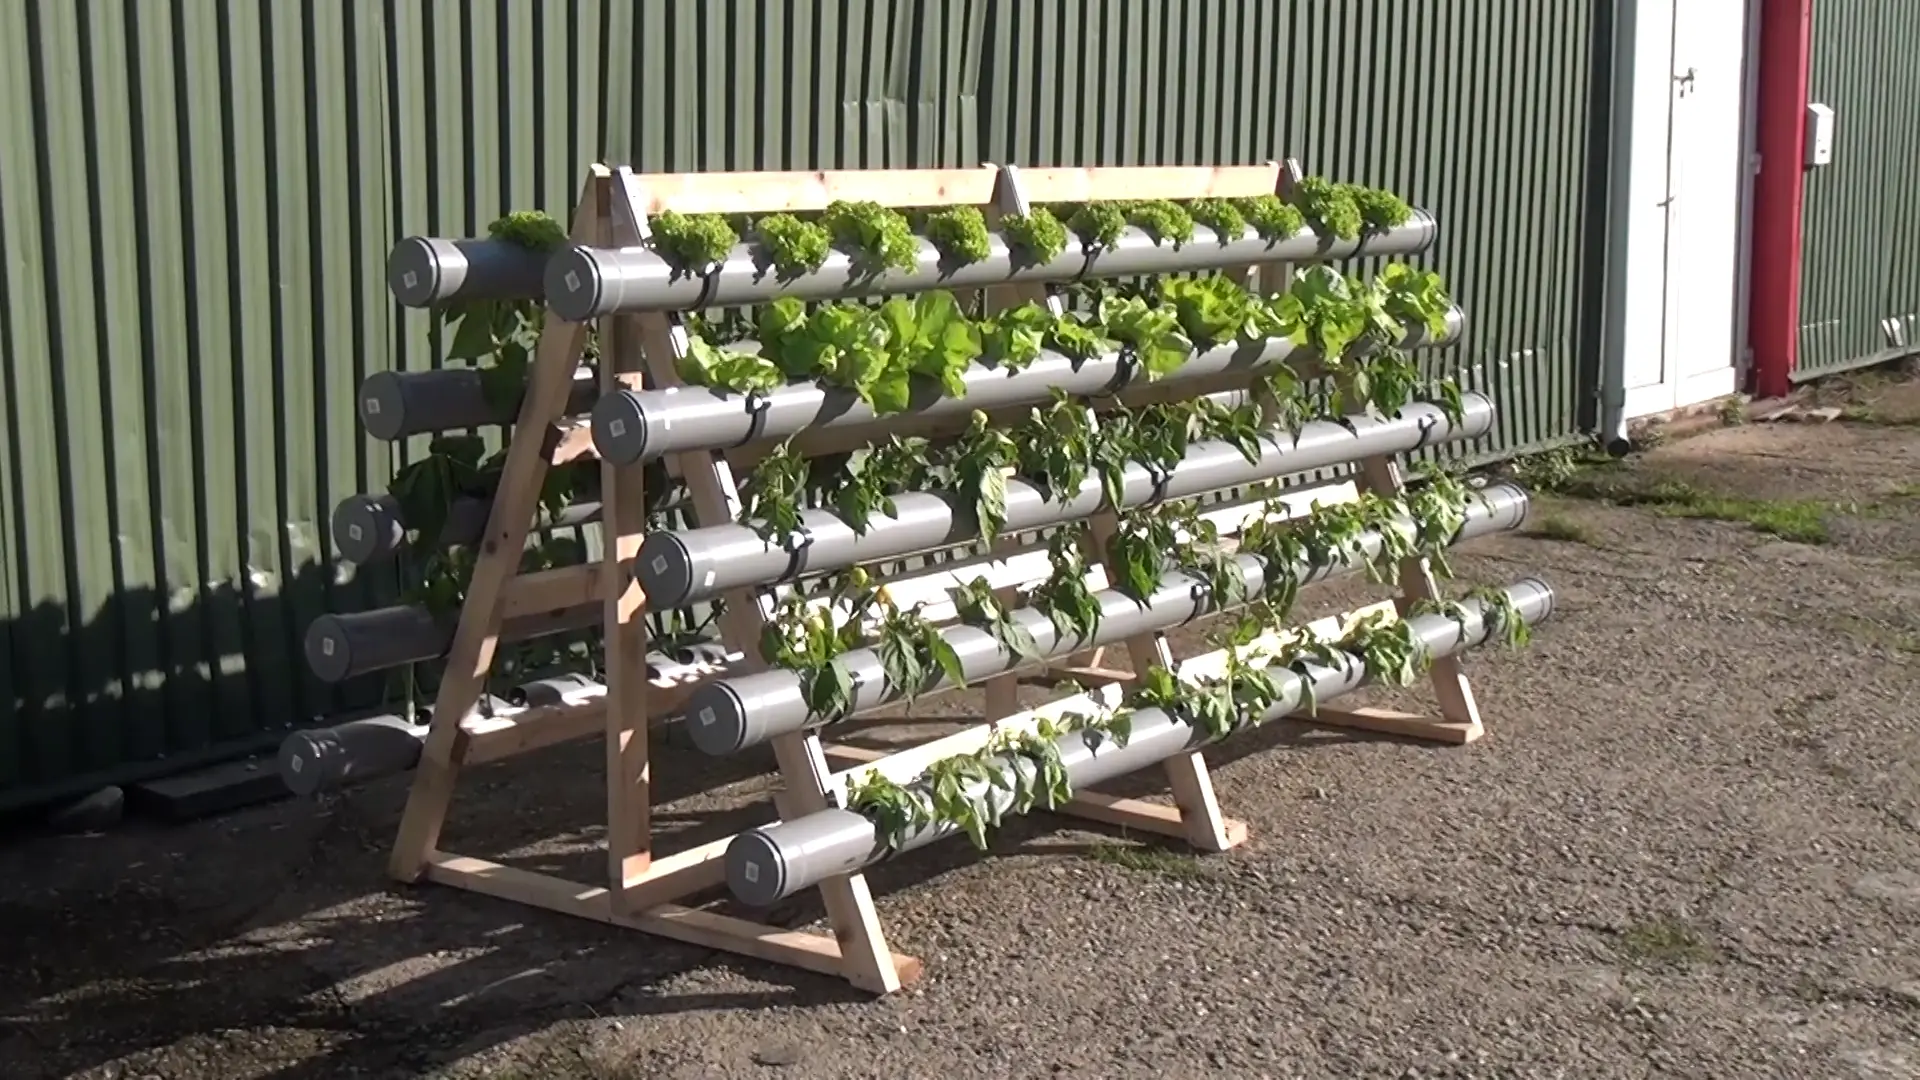 Food Growing out of pipes